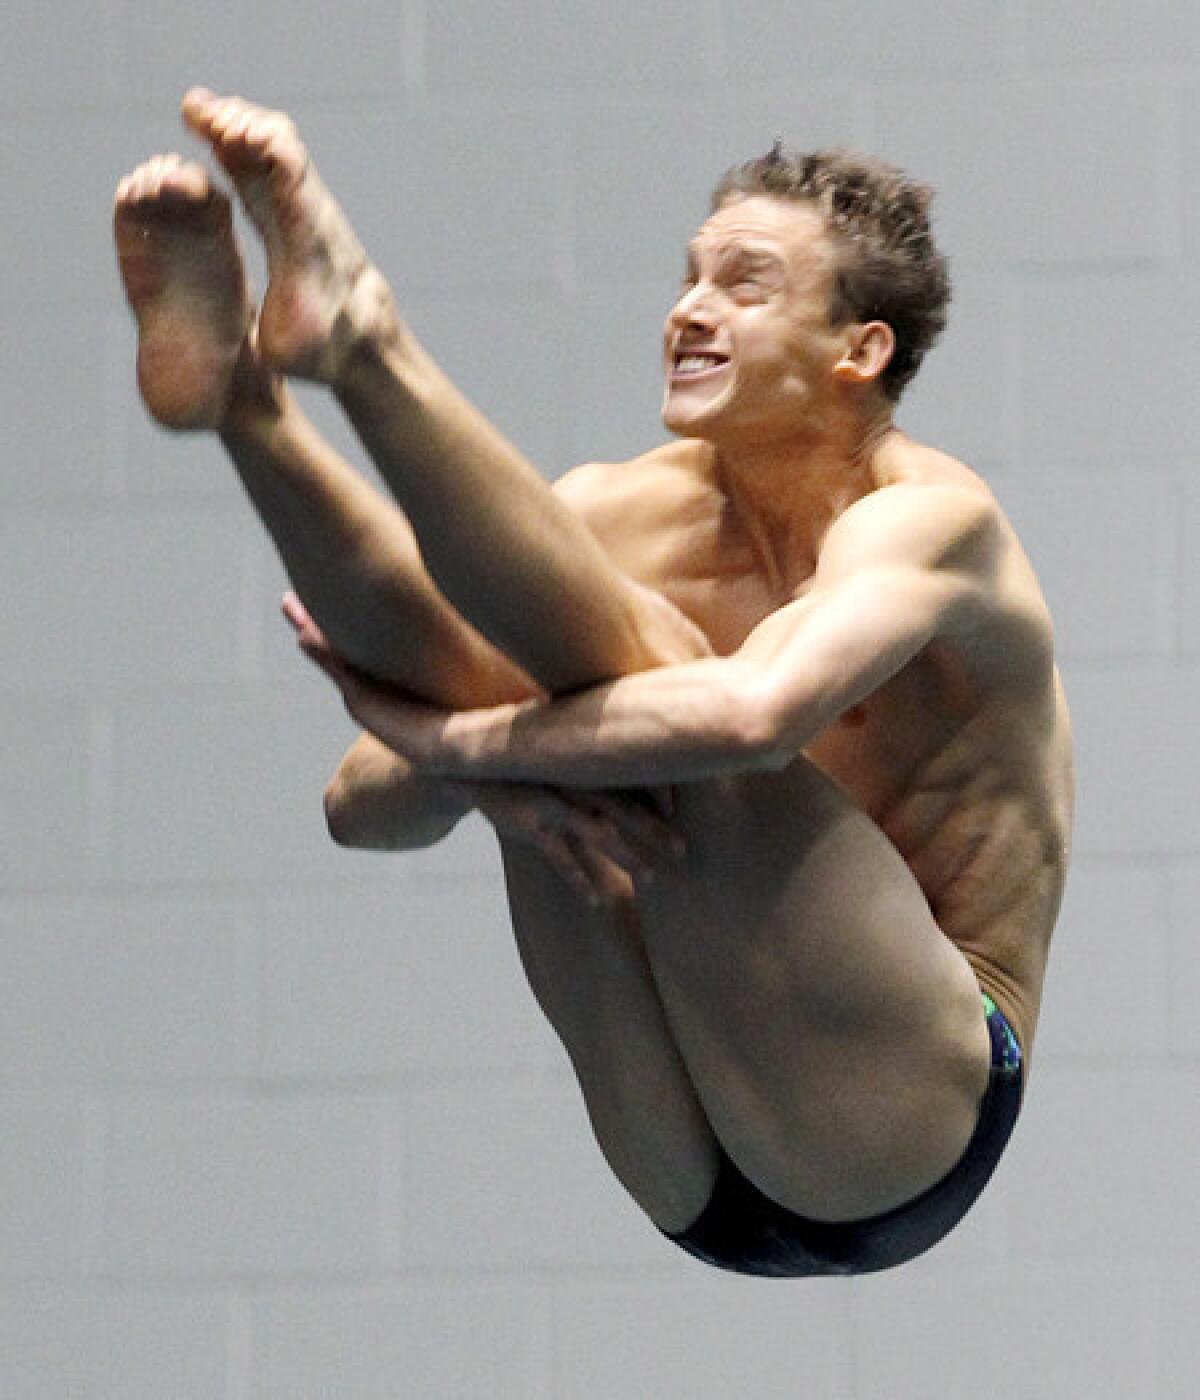 Chris Colwill performs a dive during the U.S. Olympic trials last year.